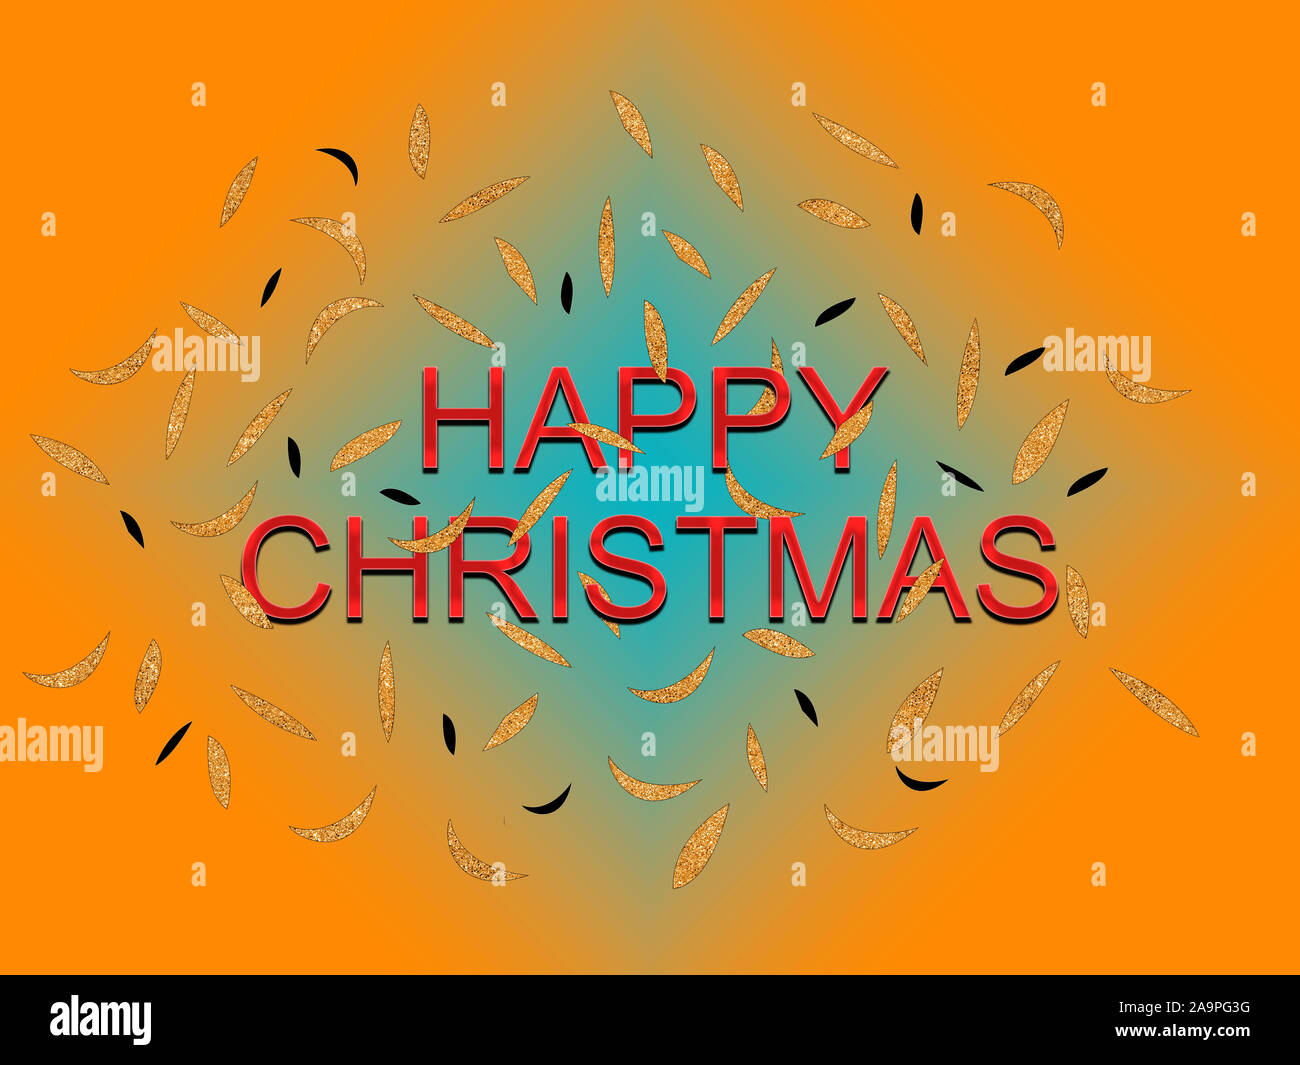 Happy Christmas message in red, orange and teal. With confetti effect.  Country creed non specific, no western symbols of trees, snow etc Stock  Photo - Alamy